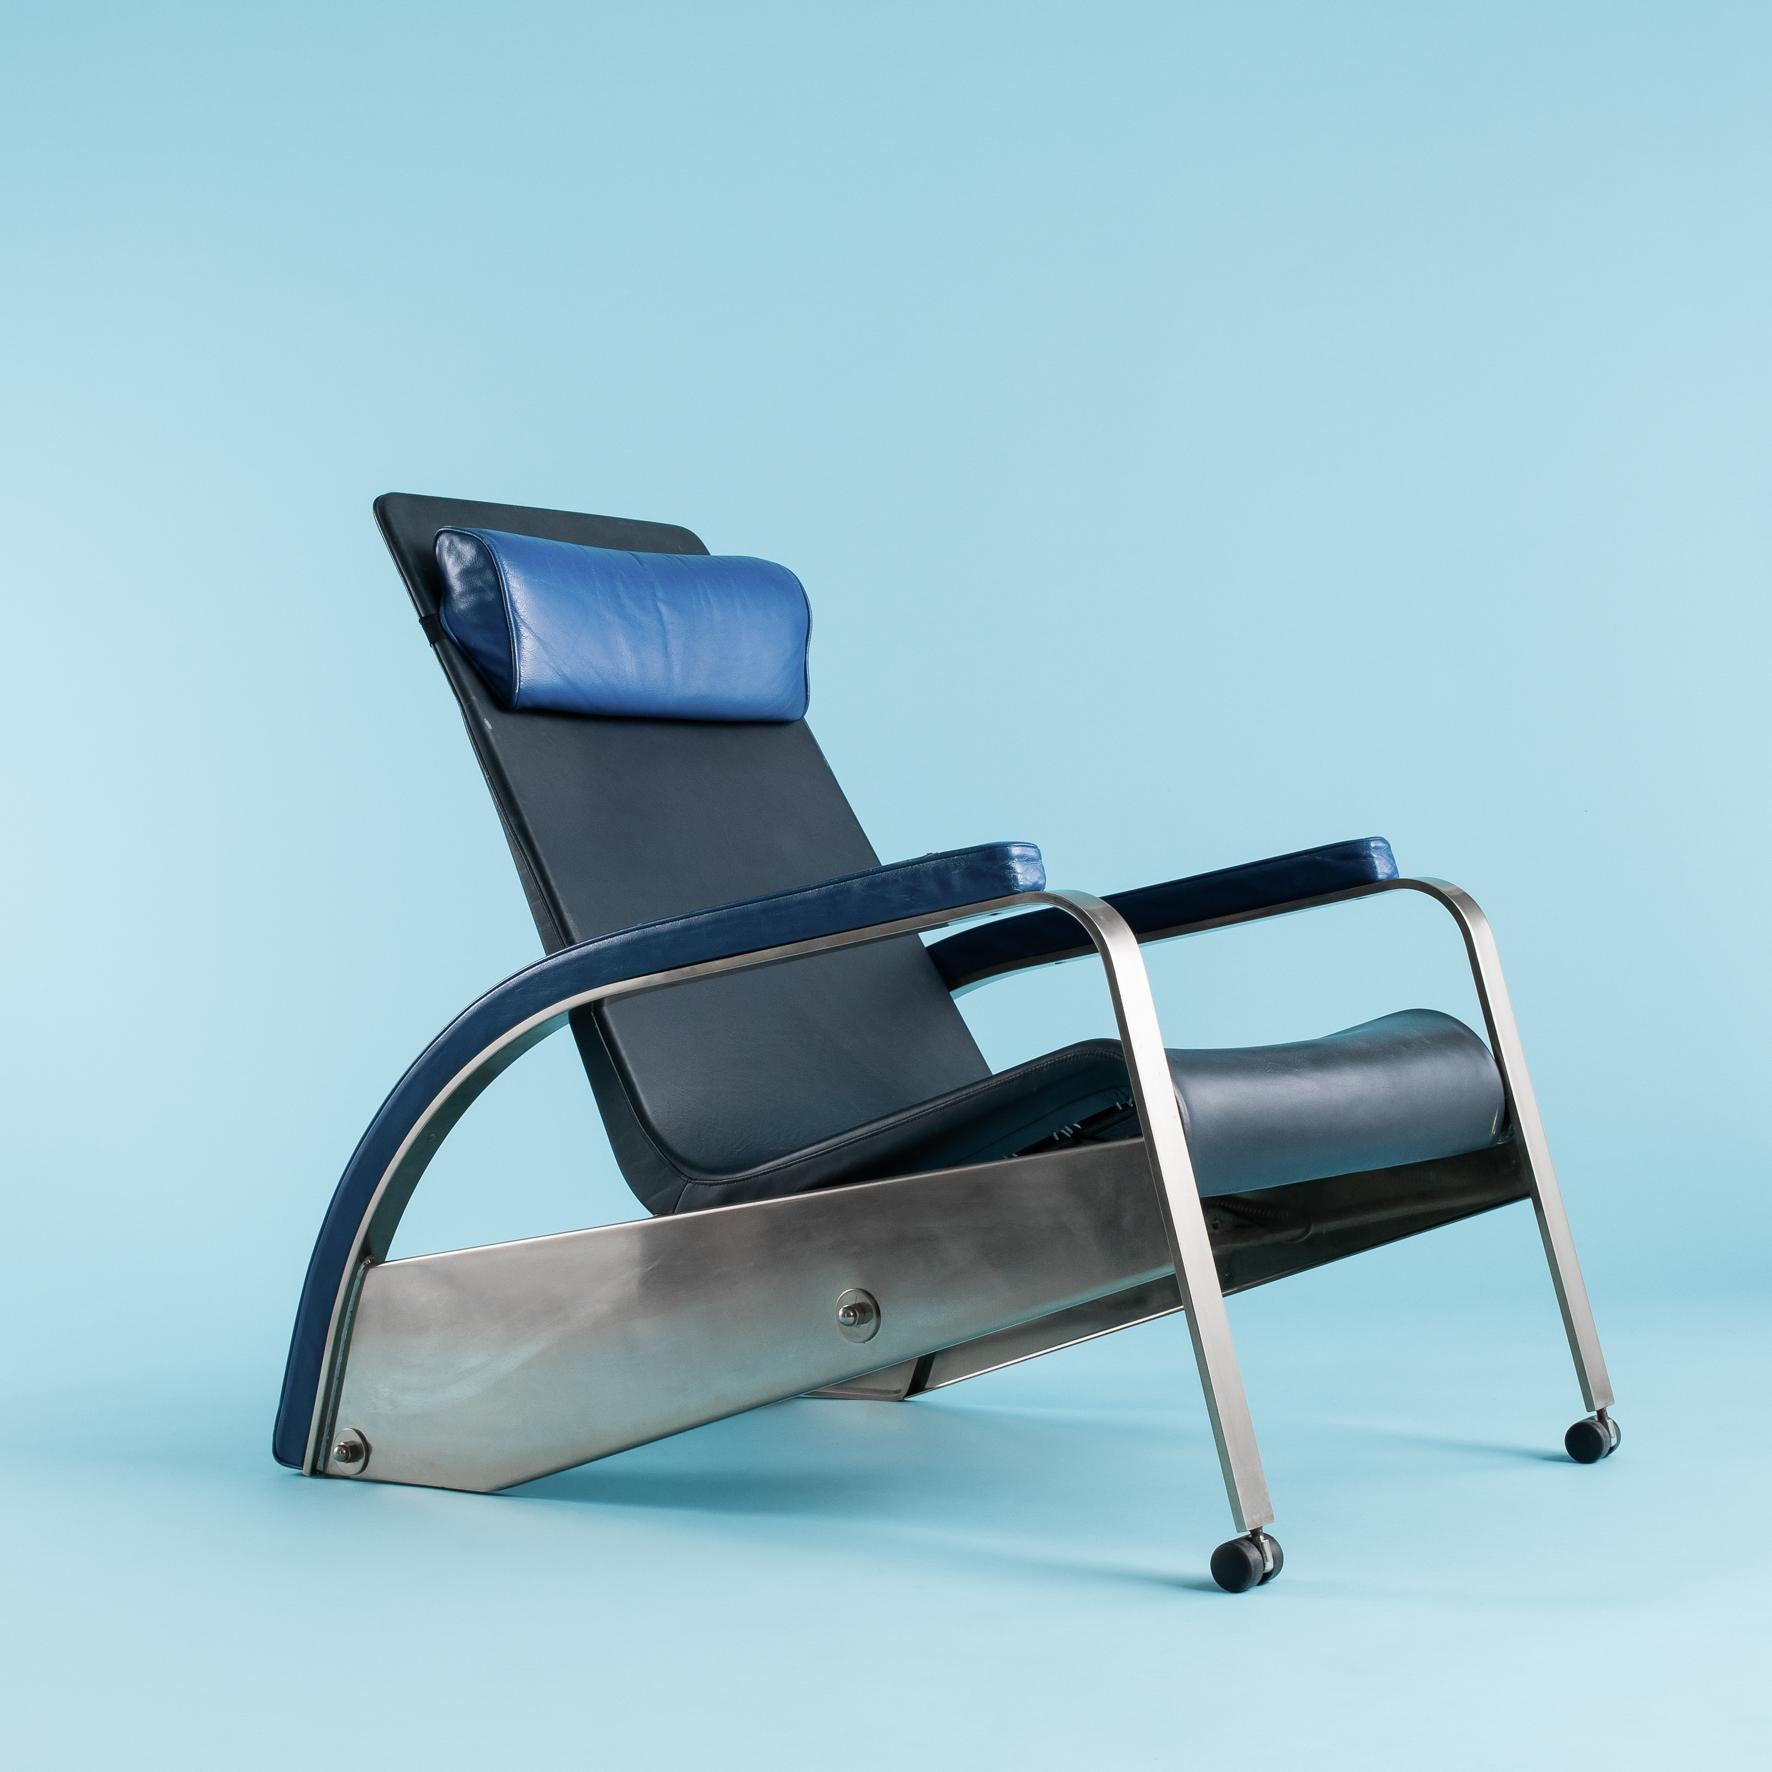 Jean Prouvé  (1901-1984)
Grand Repos armchair (creation 1930)
Tecta edition, Germany, circa 1985
Chrome-plated steel, sheet steel, dark blue and blue leather, plastic castors. Adjustable tilt
Height 90 x Width 70 x Depth 110 cm

Details :

In 1930,